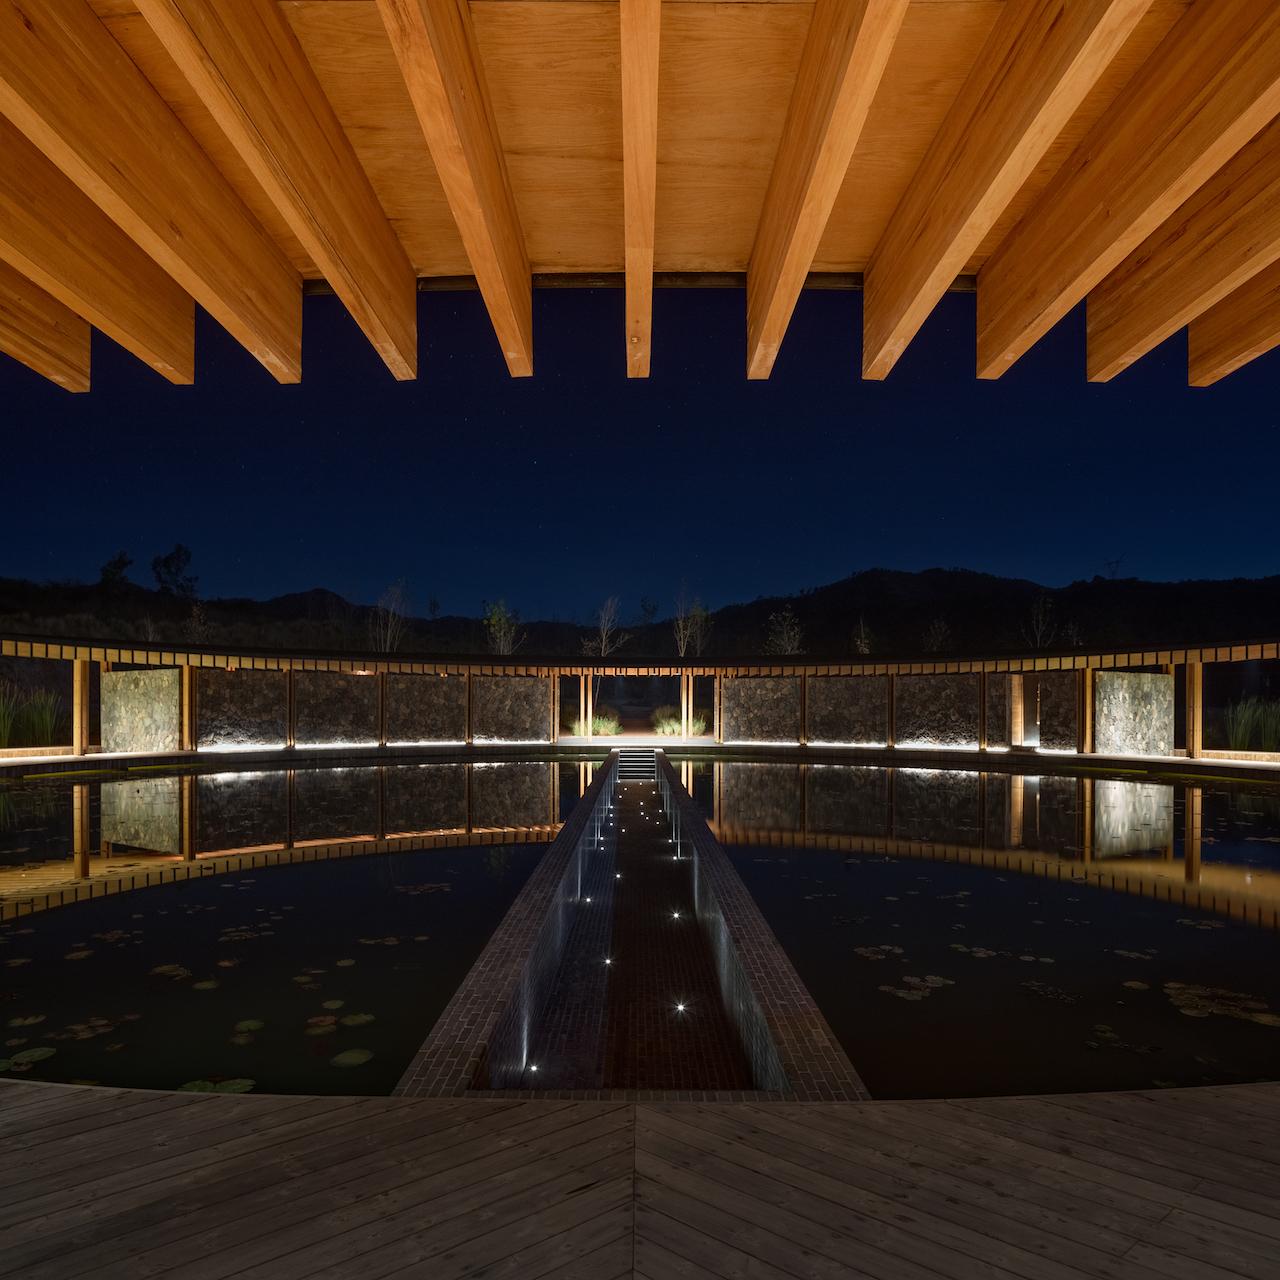 Mexico’s New Valle San Nicolás Clubhouse Showcases Sustainability and Panoramic Landscape